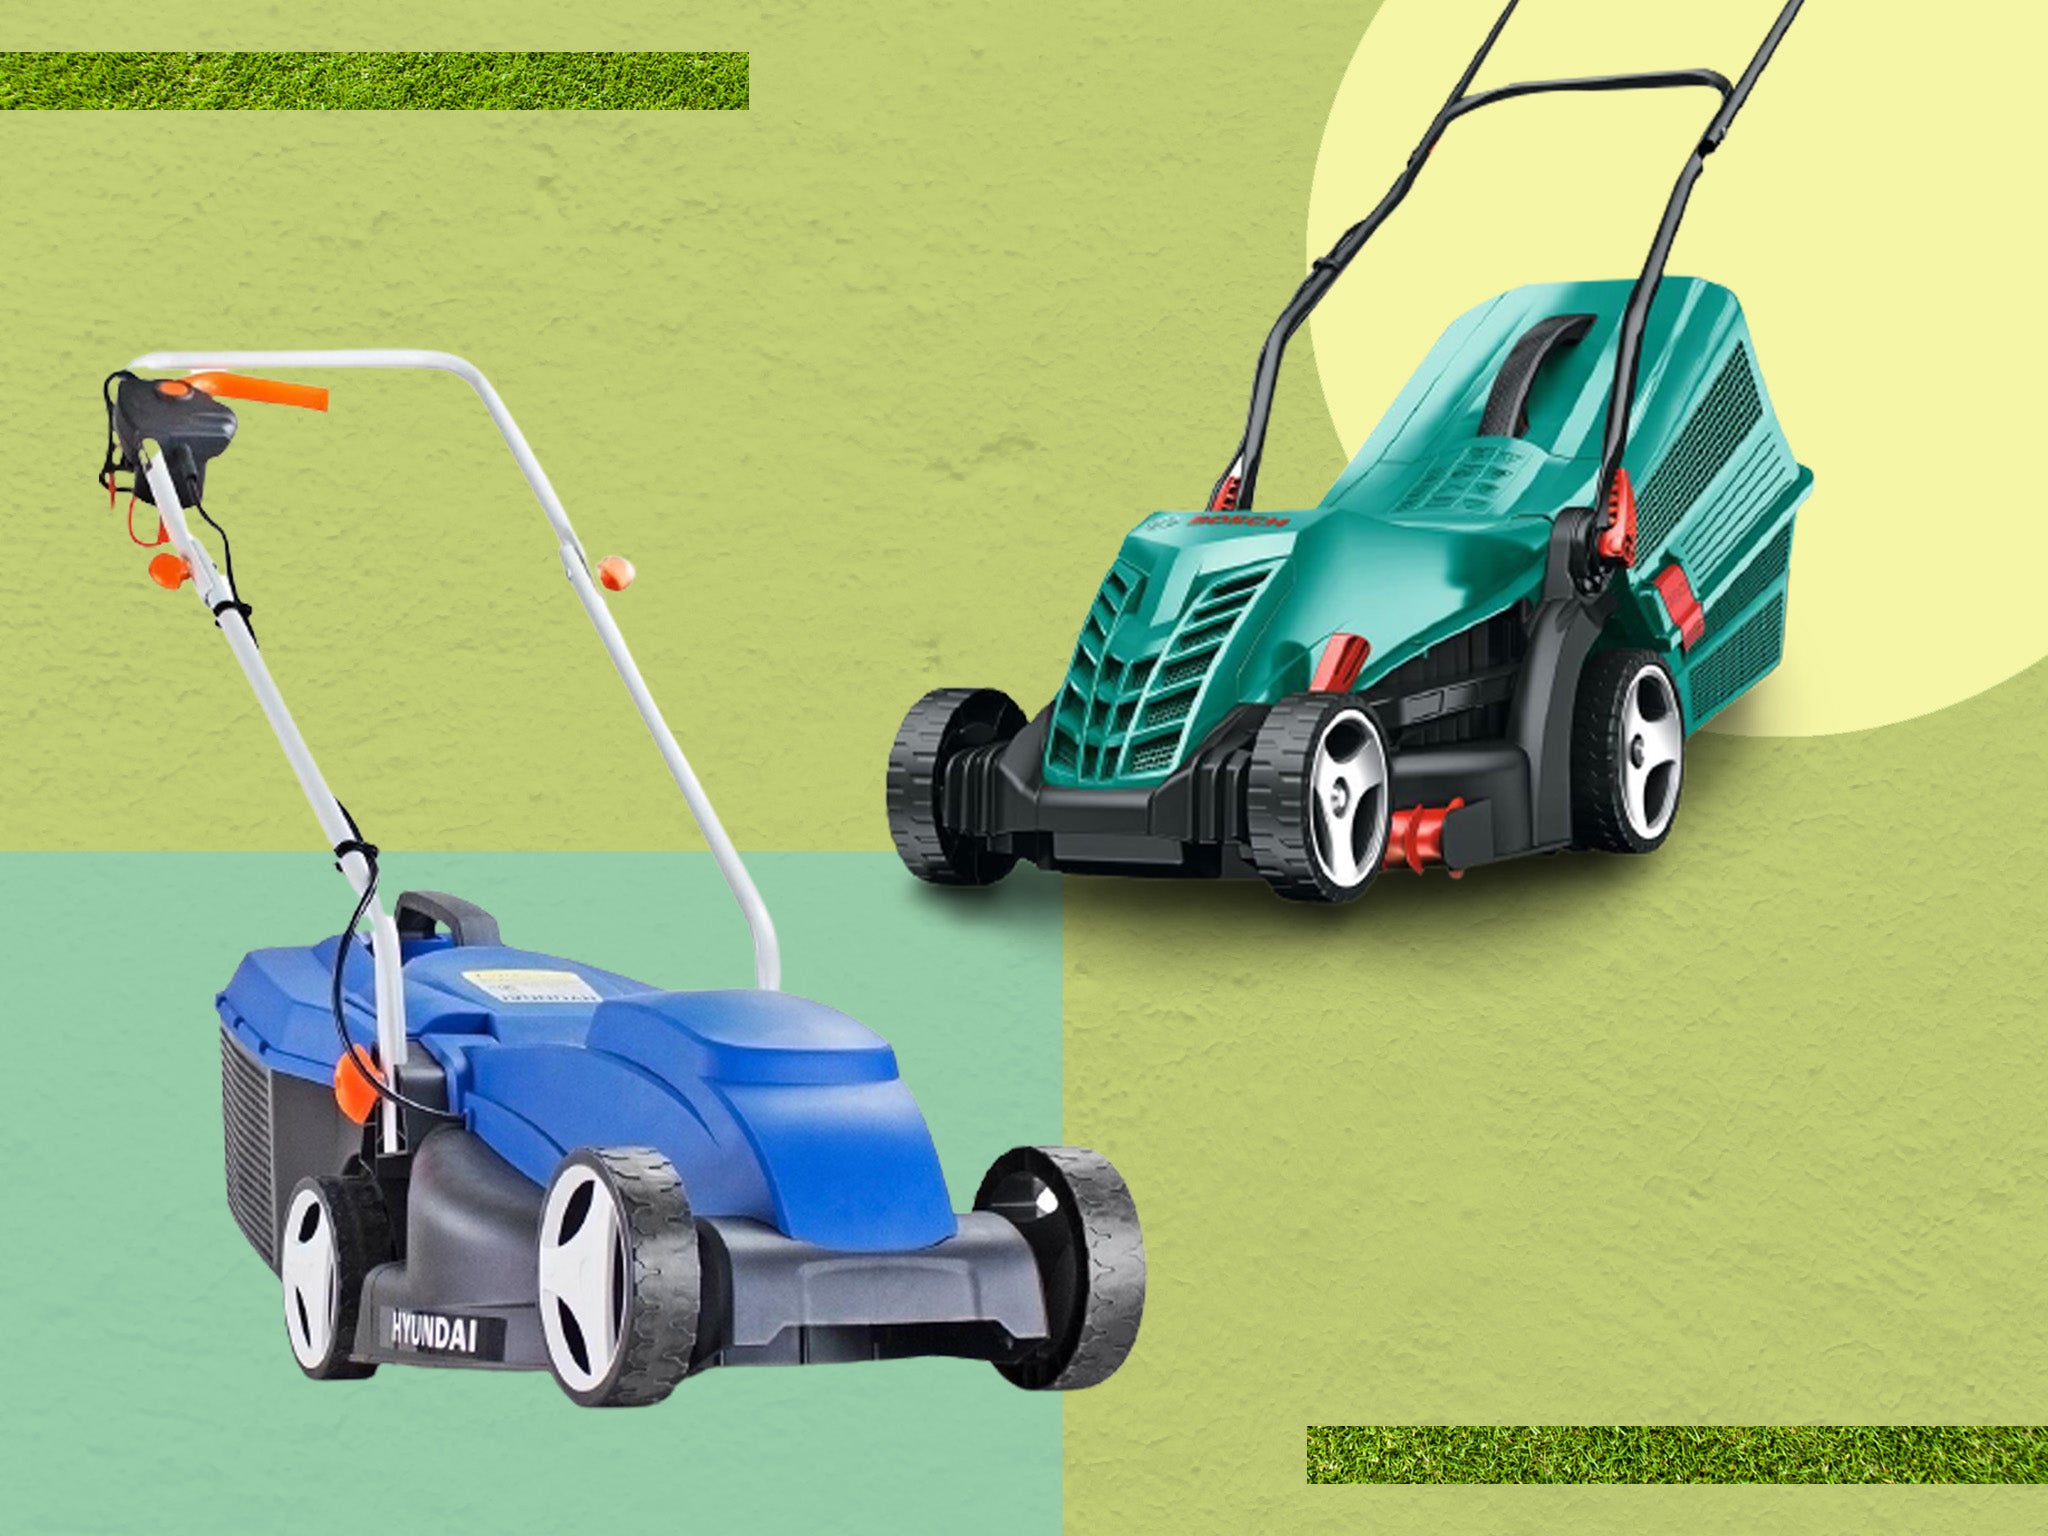 From electric to petrol models, lawnmowers are an investment